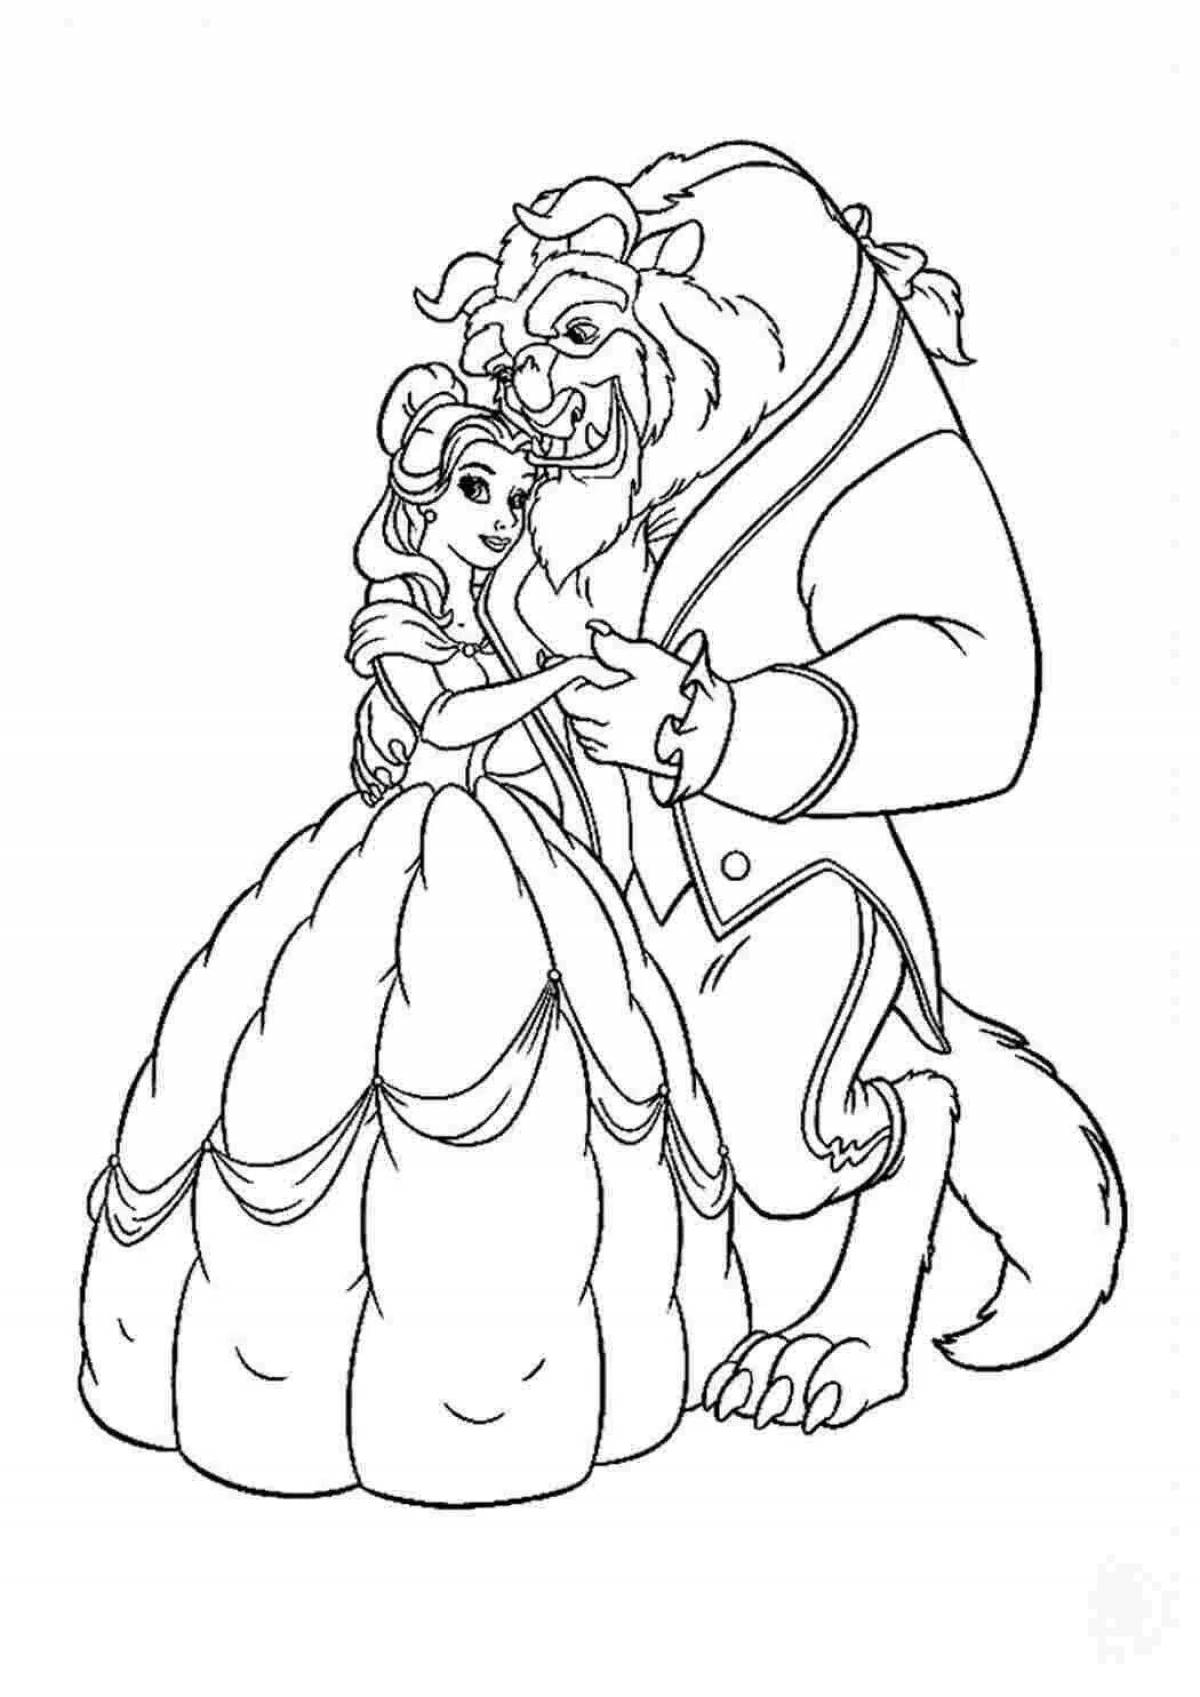 Colorfully crafted belle and the monster coloring page